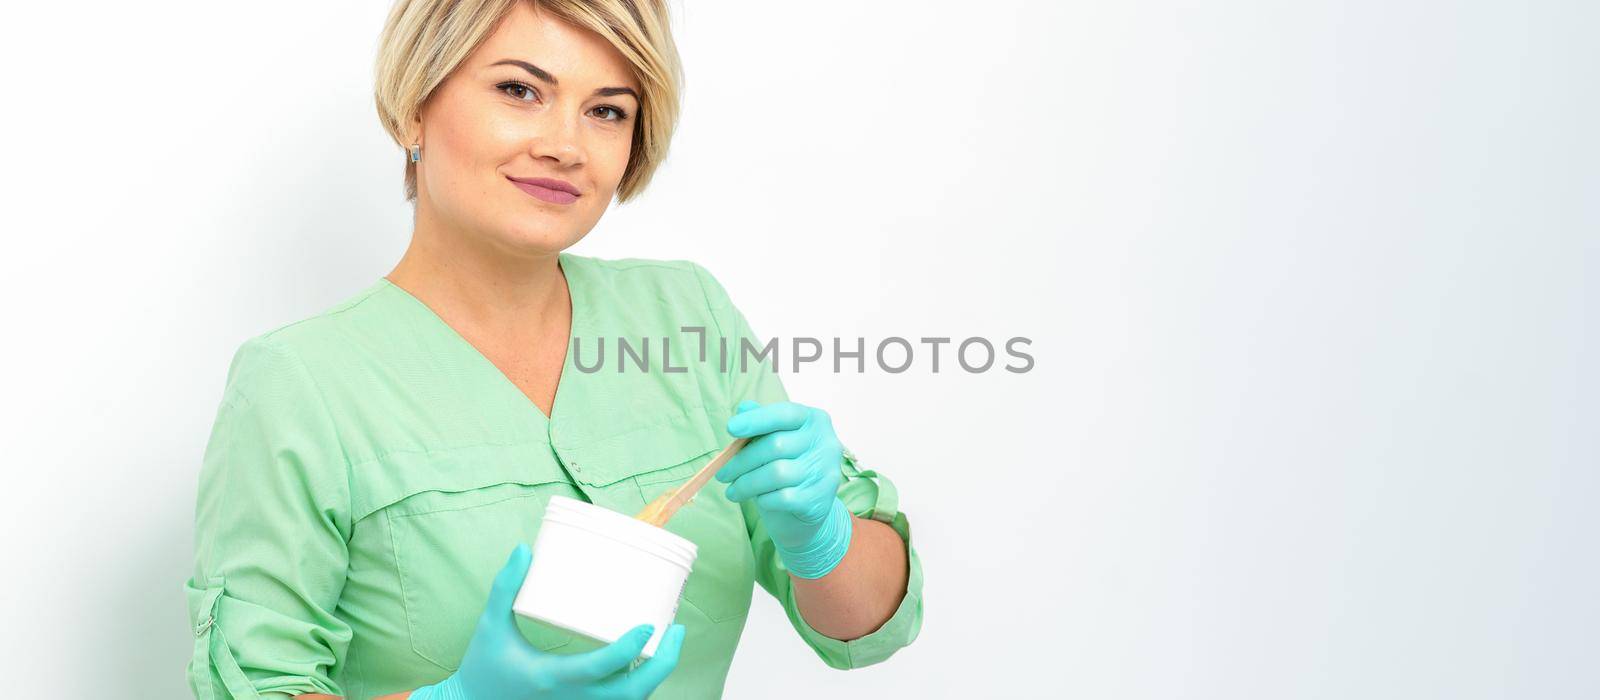 Cosmetician holding a jar of wax for depilation smiling on a white background. Natural product for hair removal. Copy space